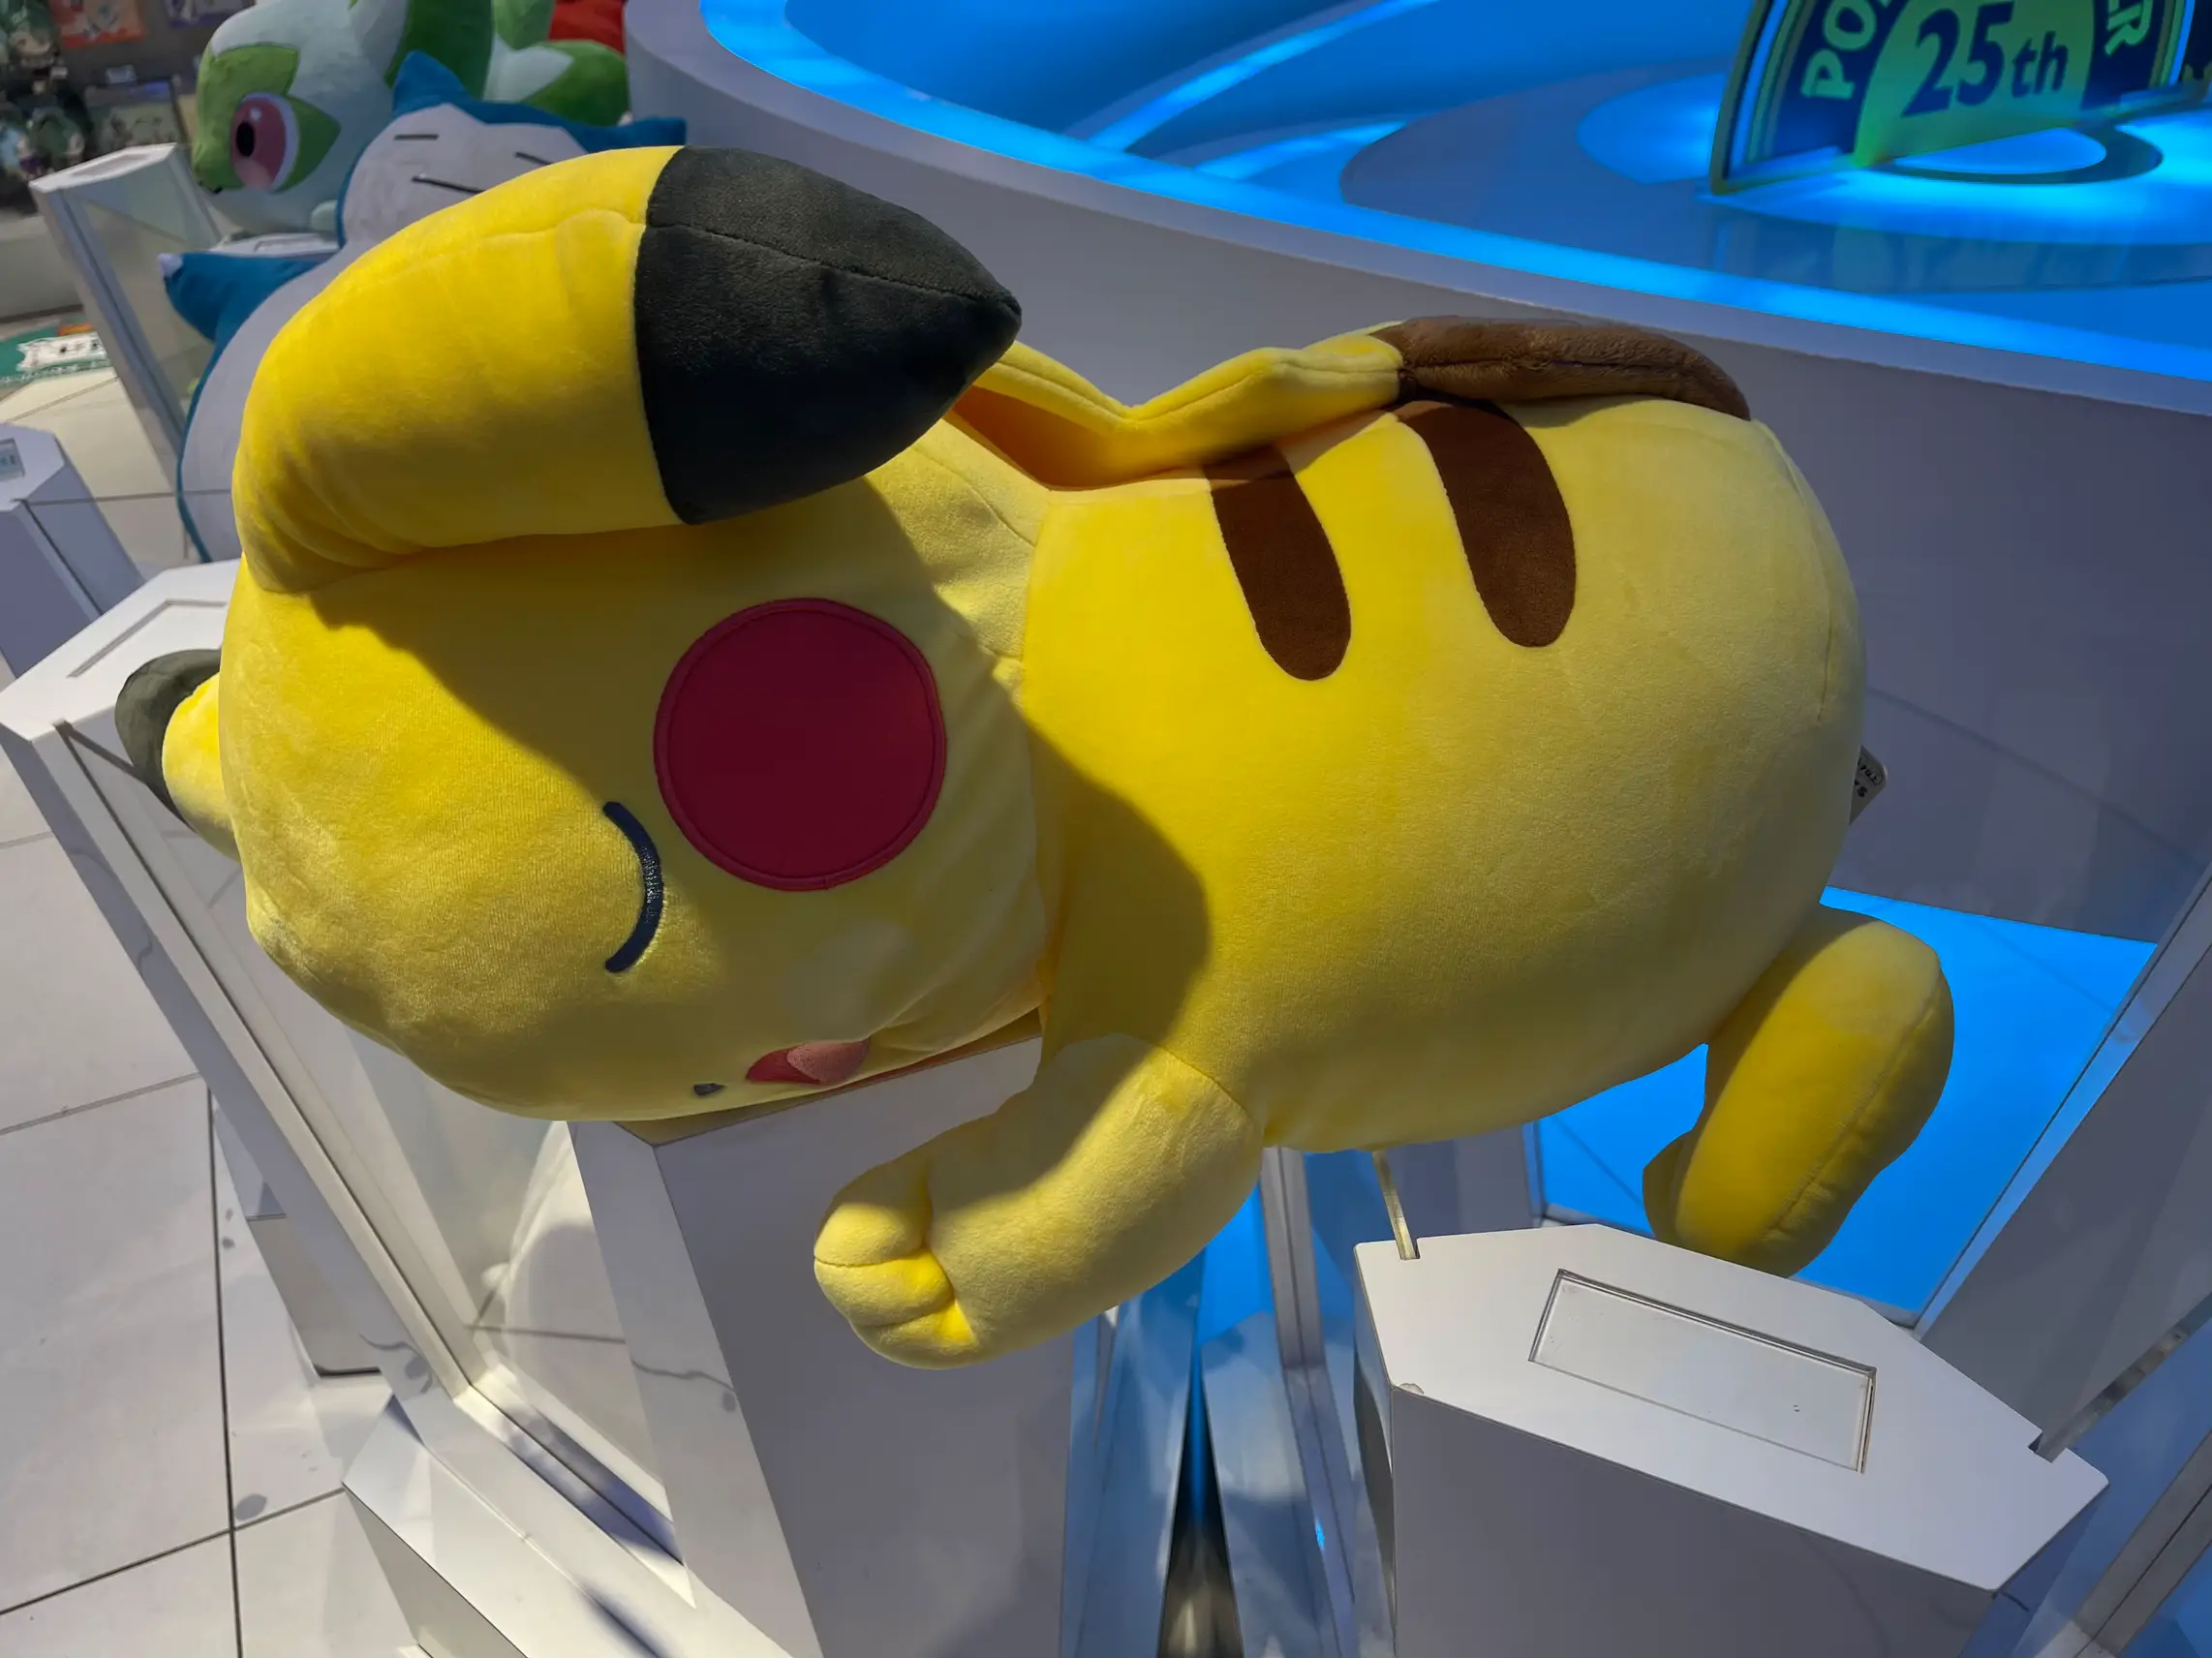 Made it to the Pokemon Center in Skytree, Tokyo! : r/pokemon